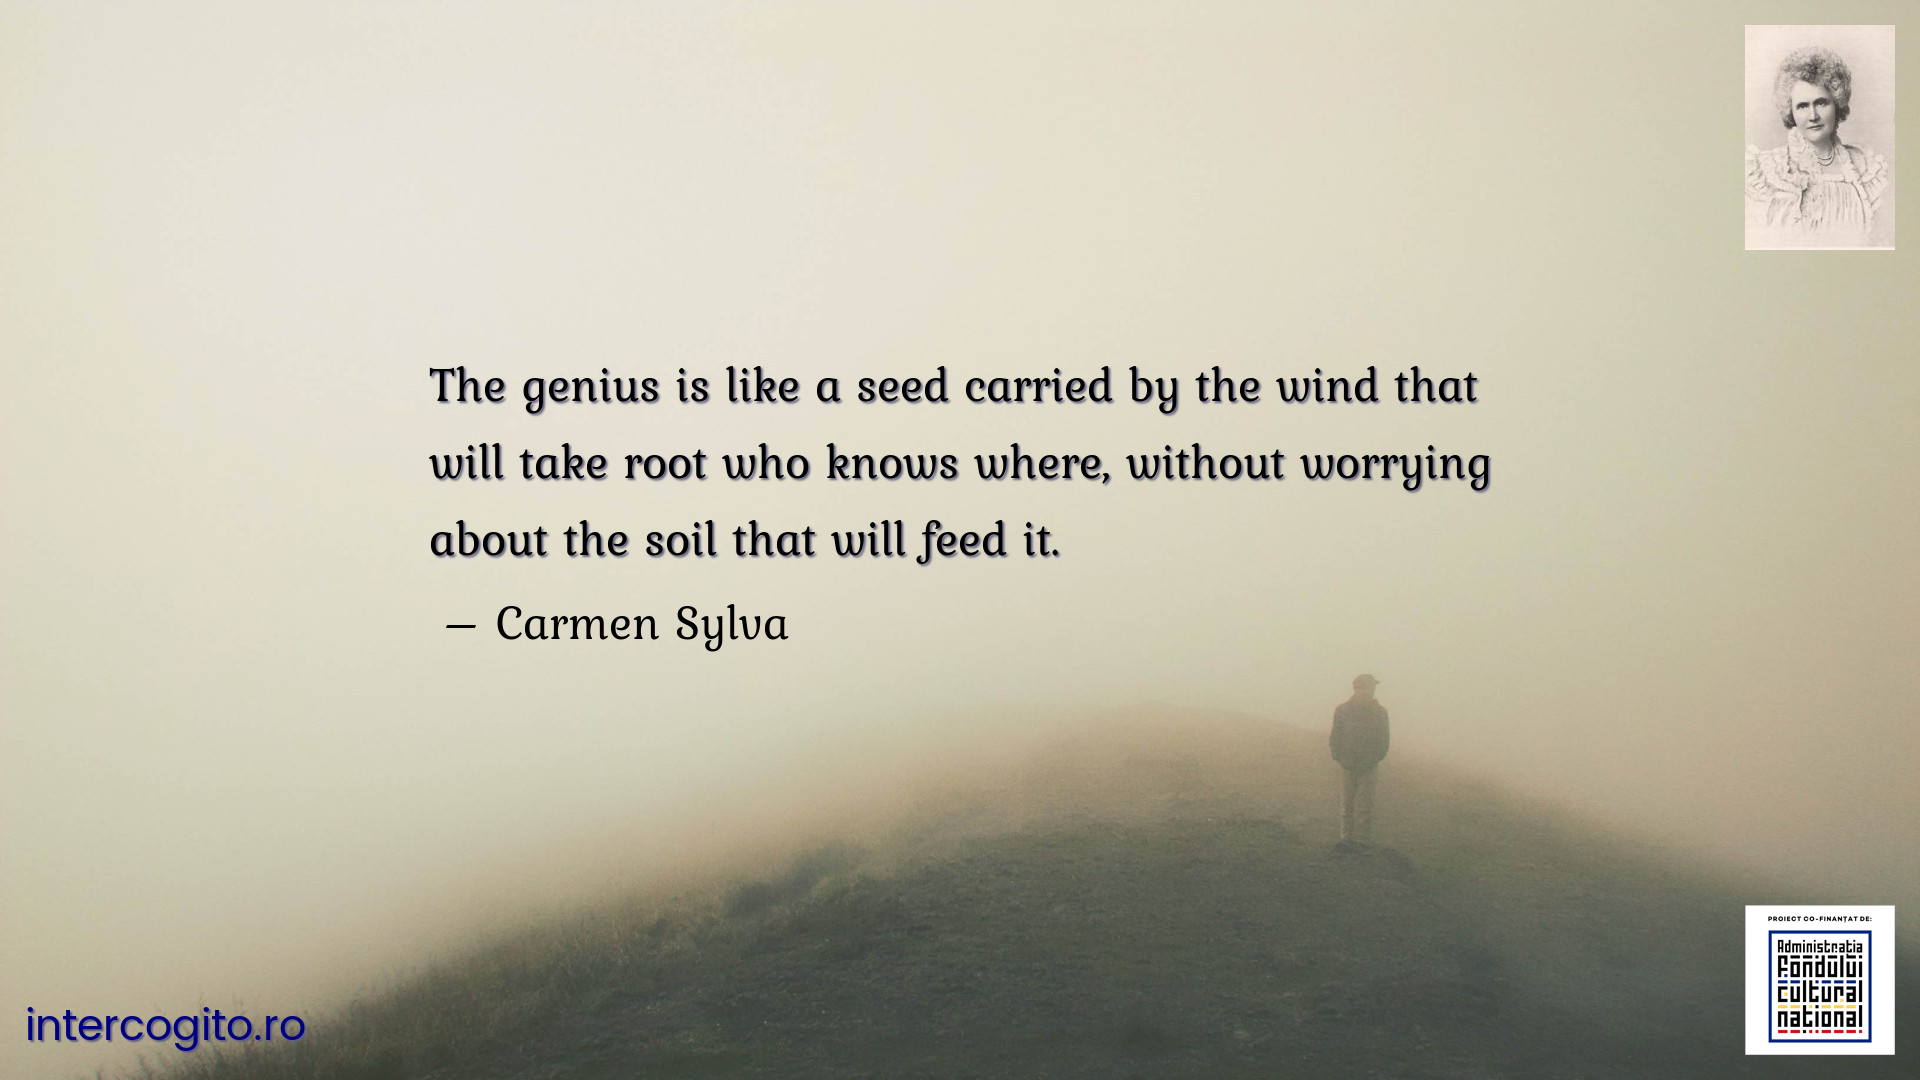 The genius is like a seed carried by the wind that will take root who knows where, without worrying about the soil that will feed it.